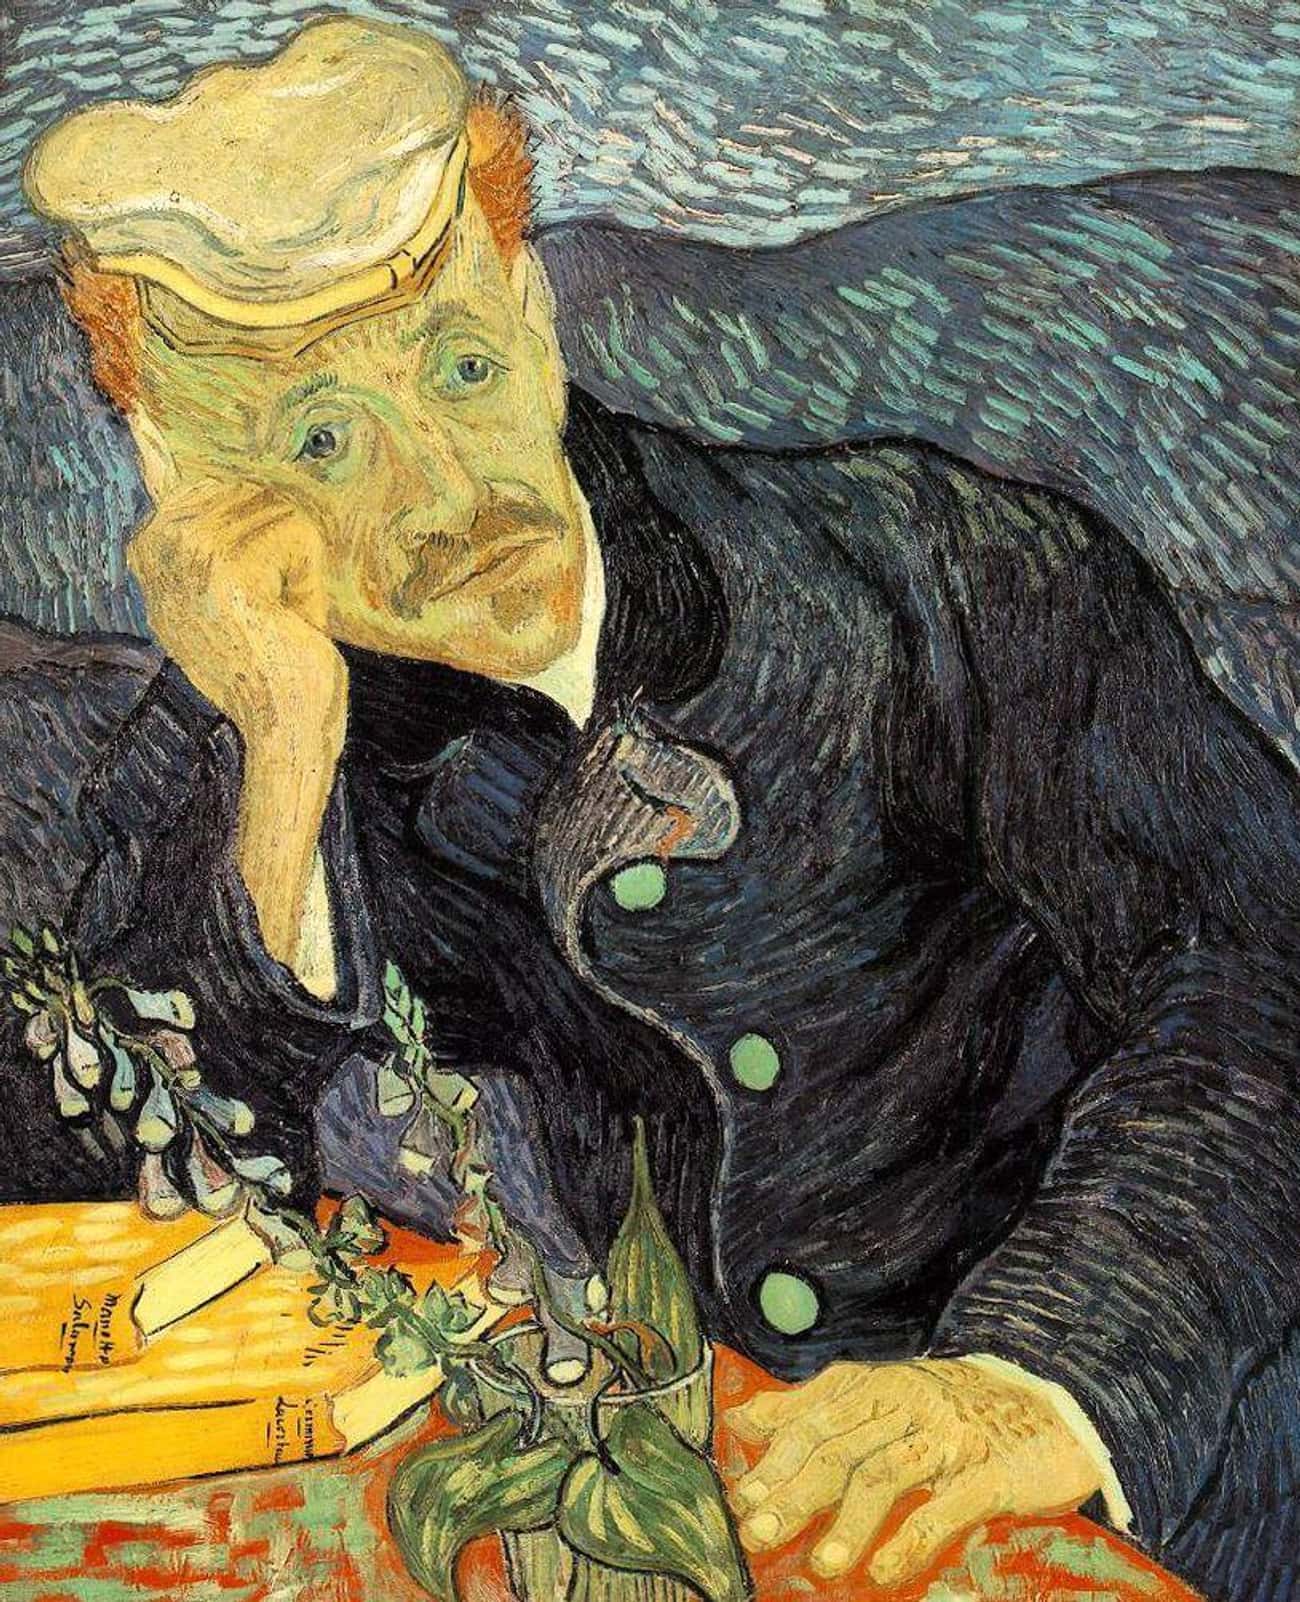 At One Time, A Van Gogh Was The Most Expensive Painting In The World